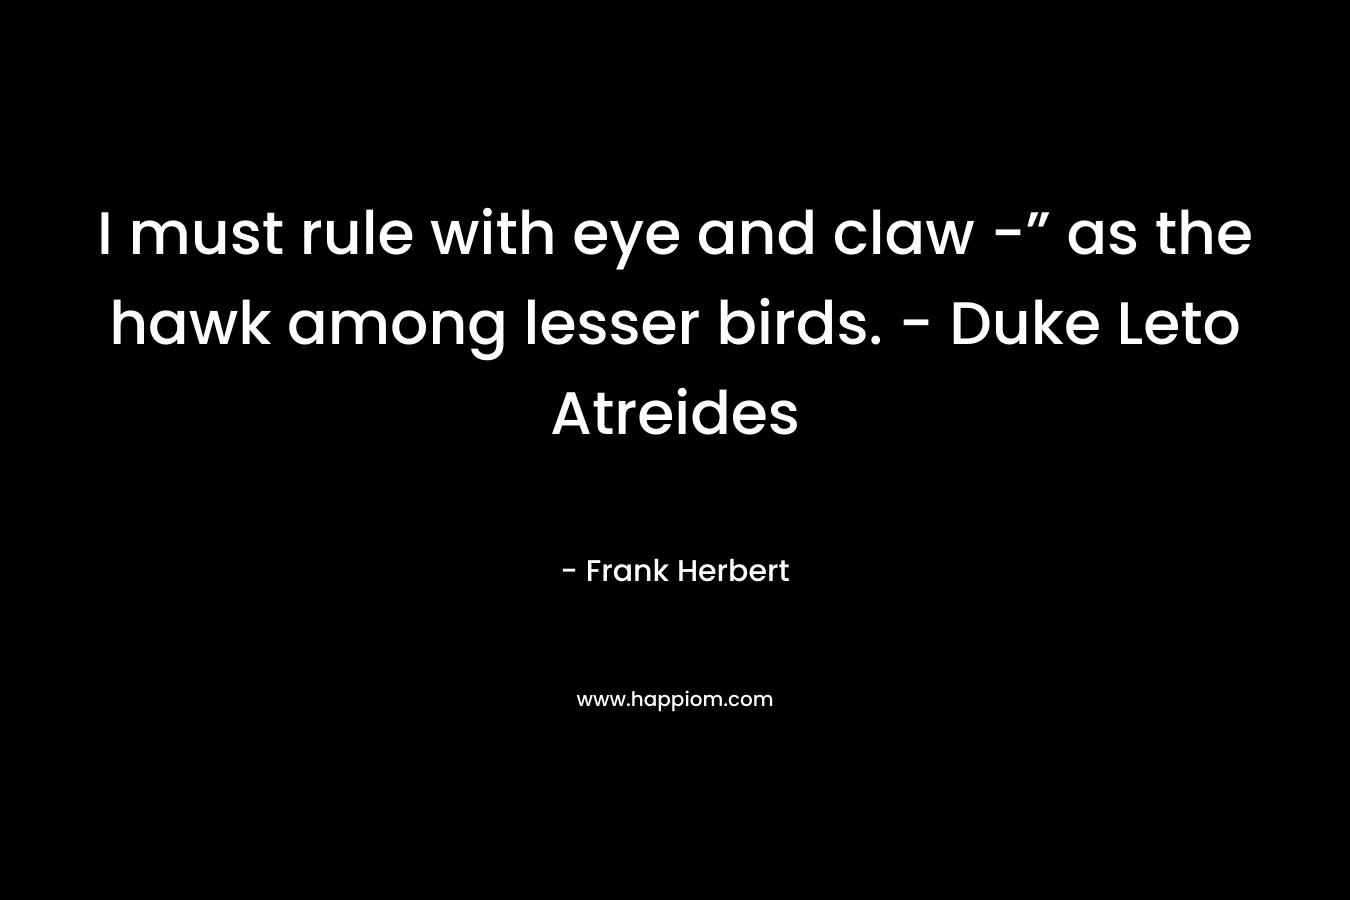 I must rule with eye and claw -” as the hawk among lesser birds. - Duke Leto Atreides